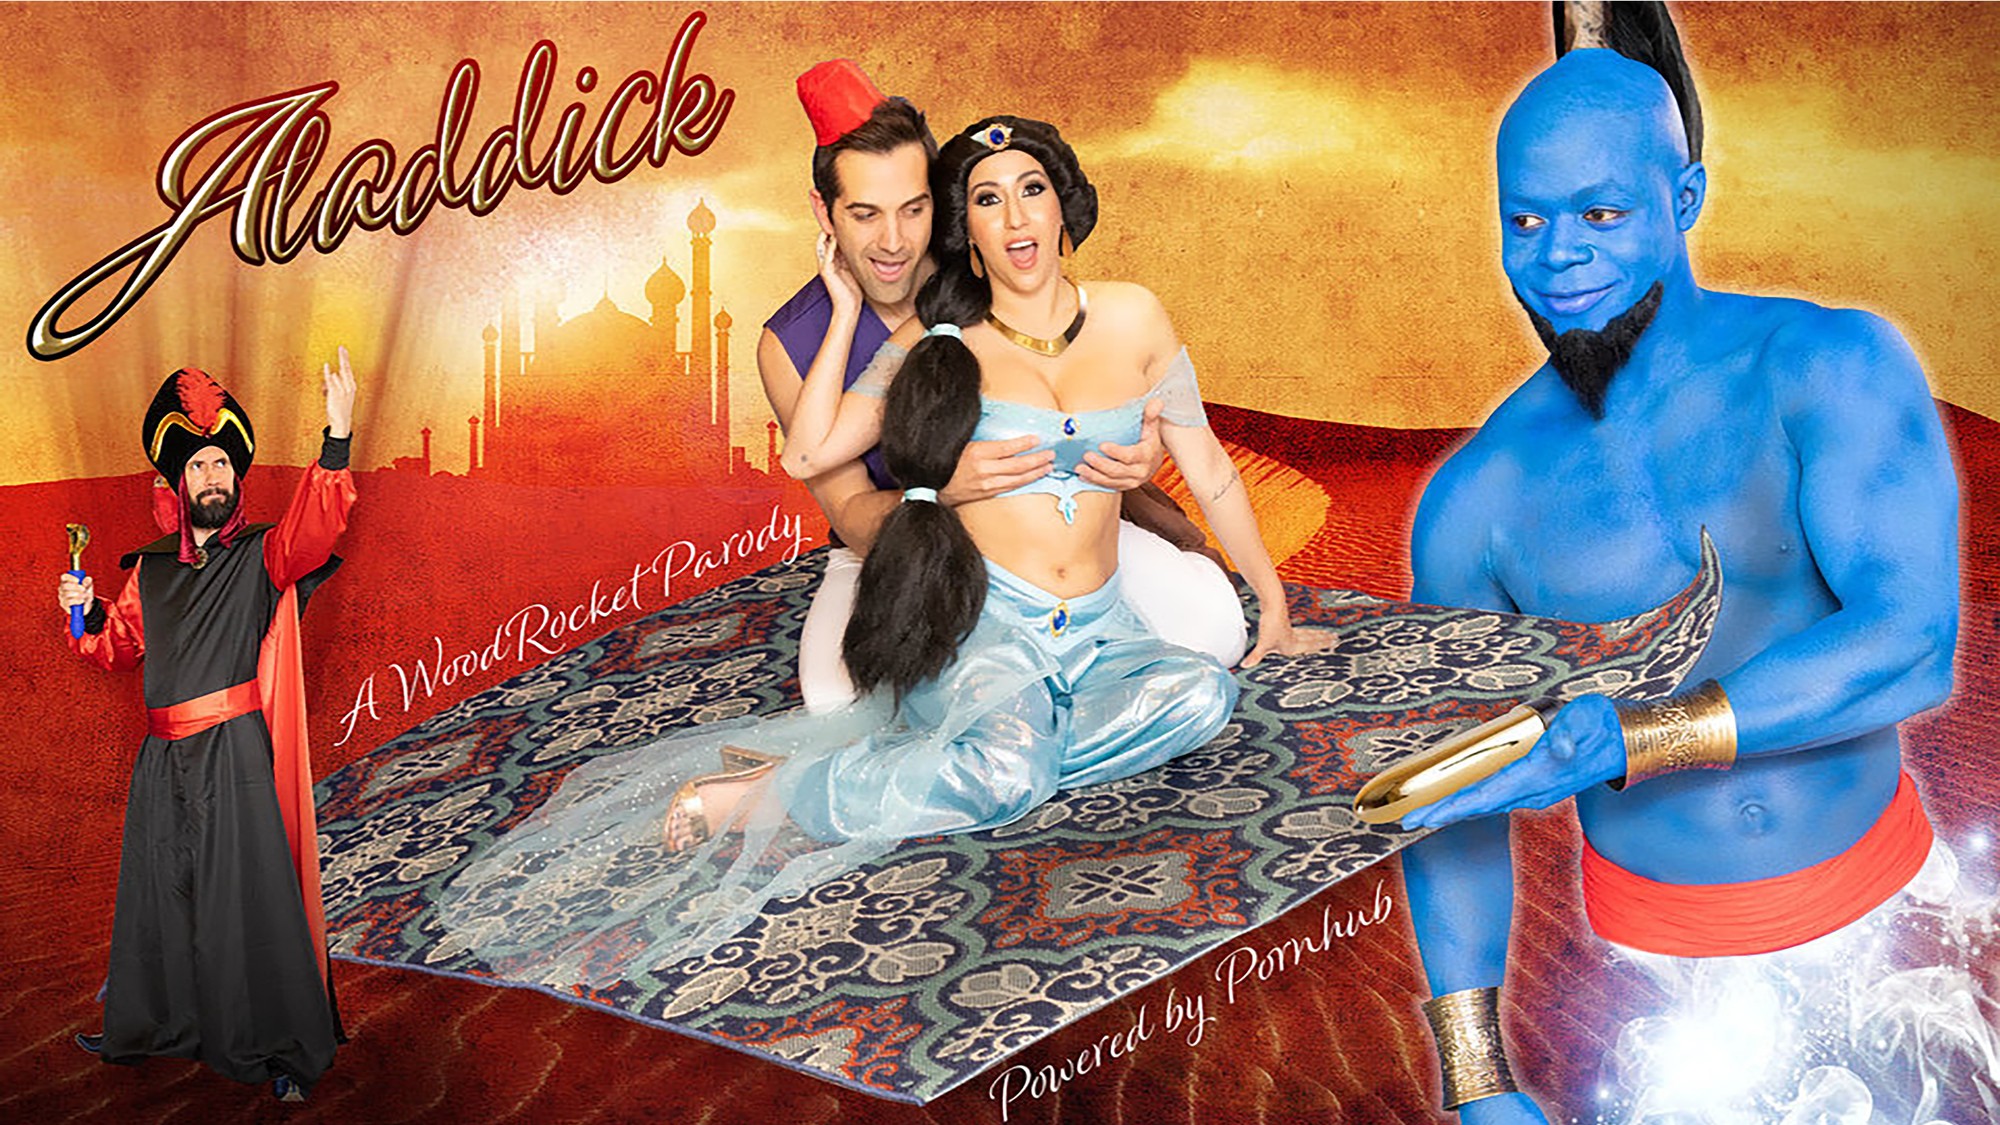 Bones Tv Show Porn - The 'Aladdin' Porn Parody Is Here and We Fixed Its Title - VICE